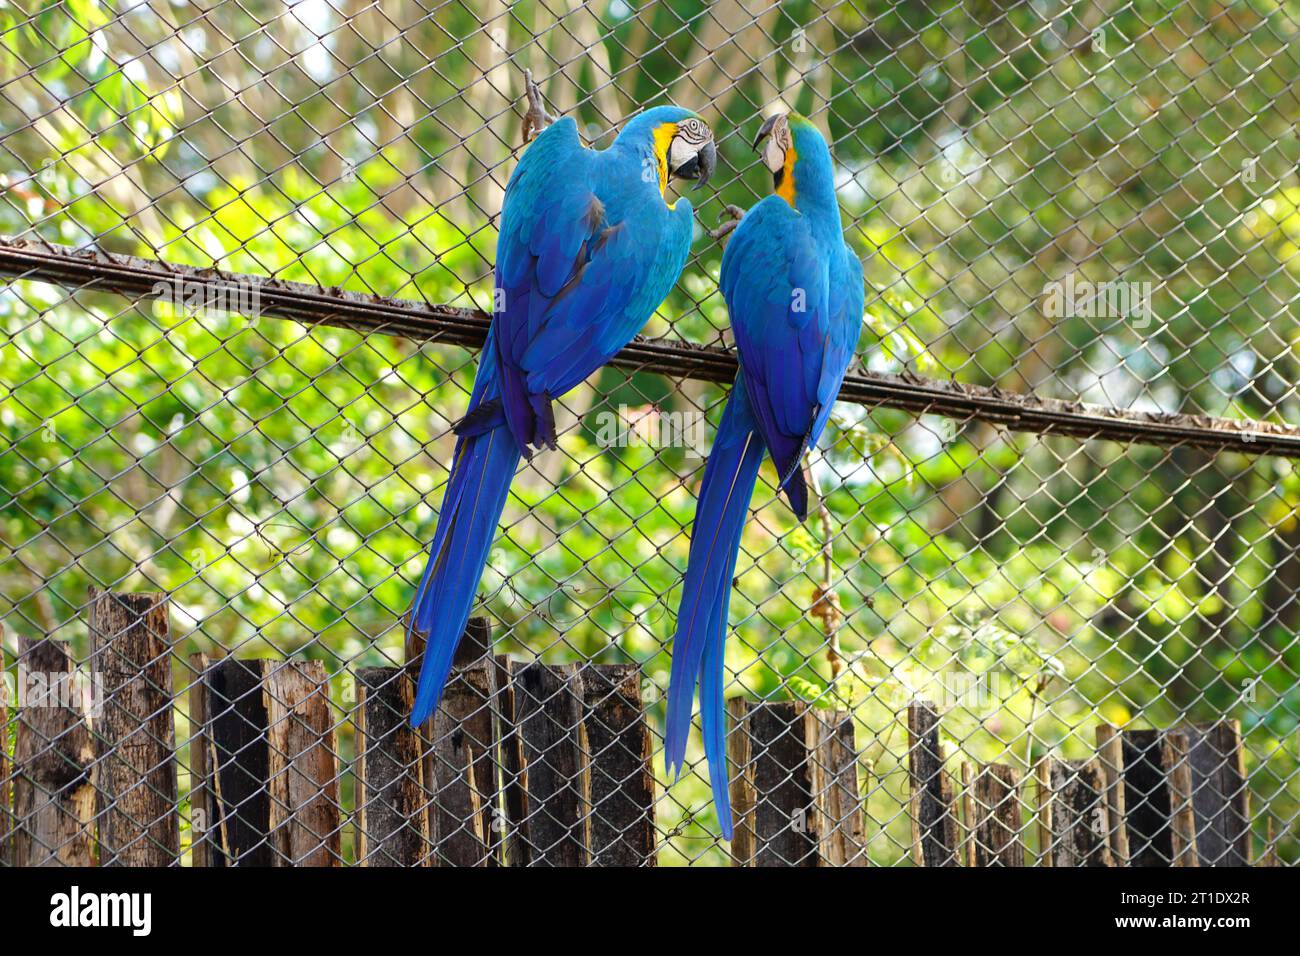 Back view of two blue-and-gold macaw confabulating in the cage Stock Photo